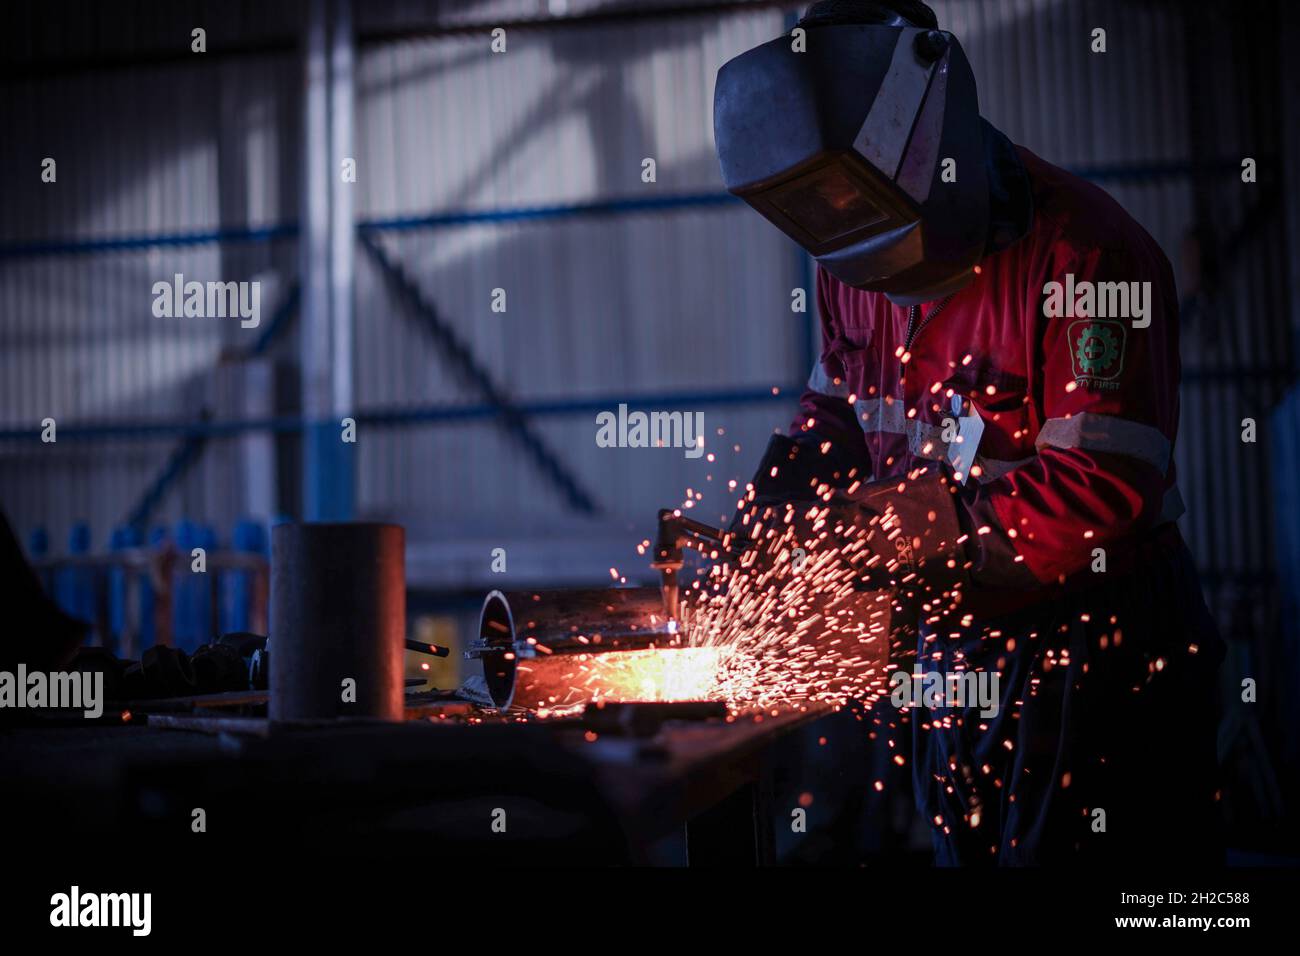 The welding or grinding works that produce steel sparks turn the hard work into beauty of light spark Stock Photo